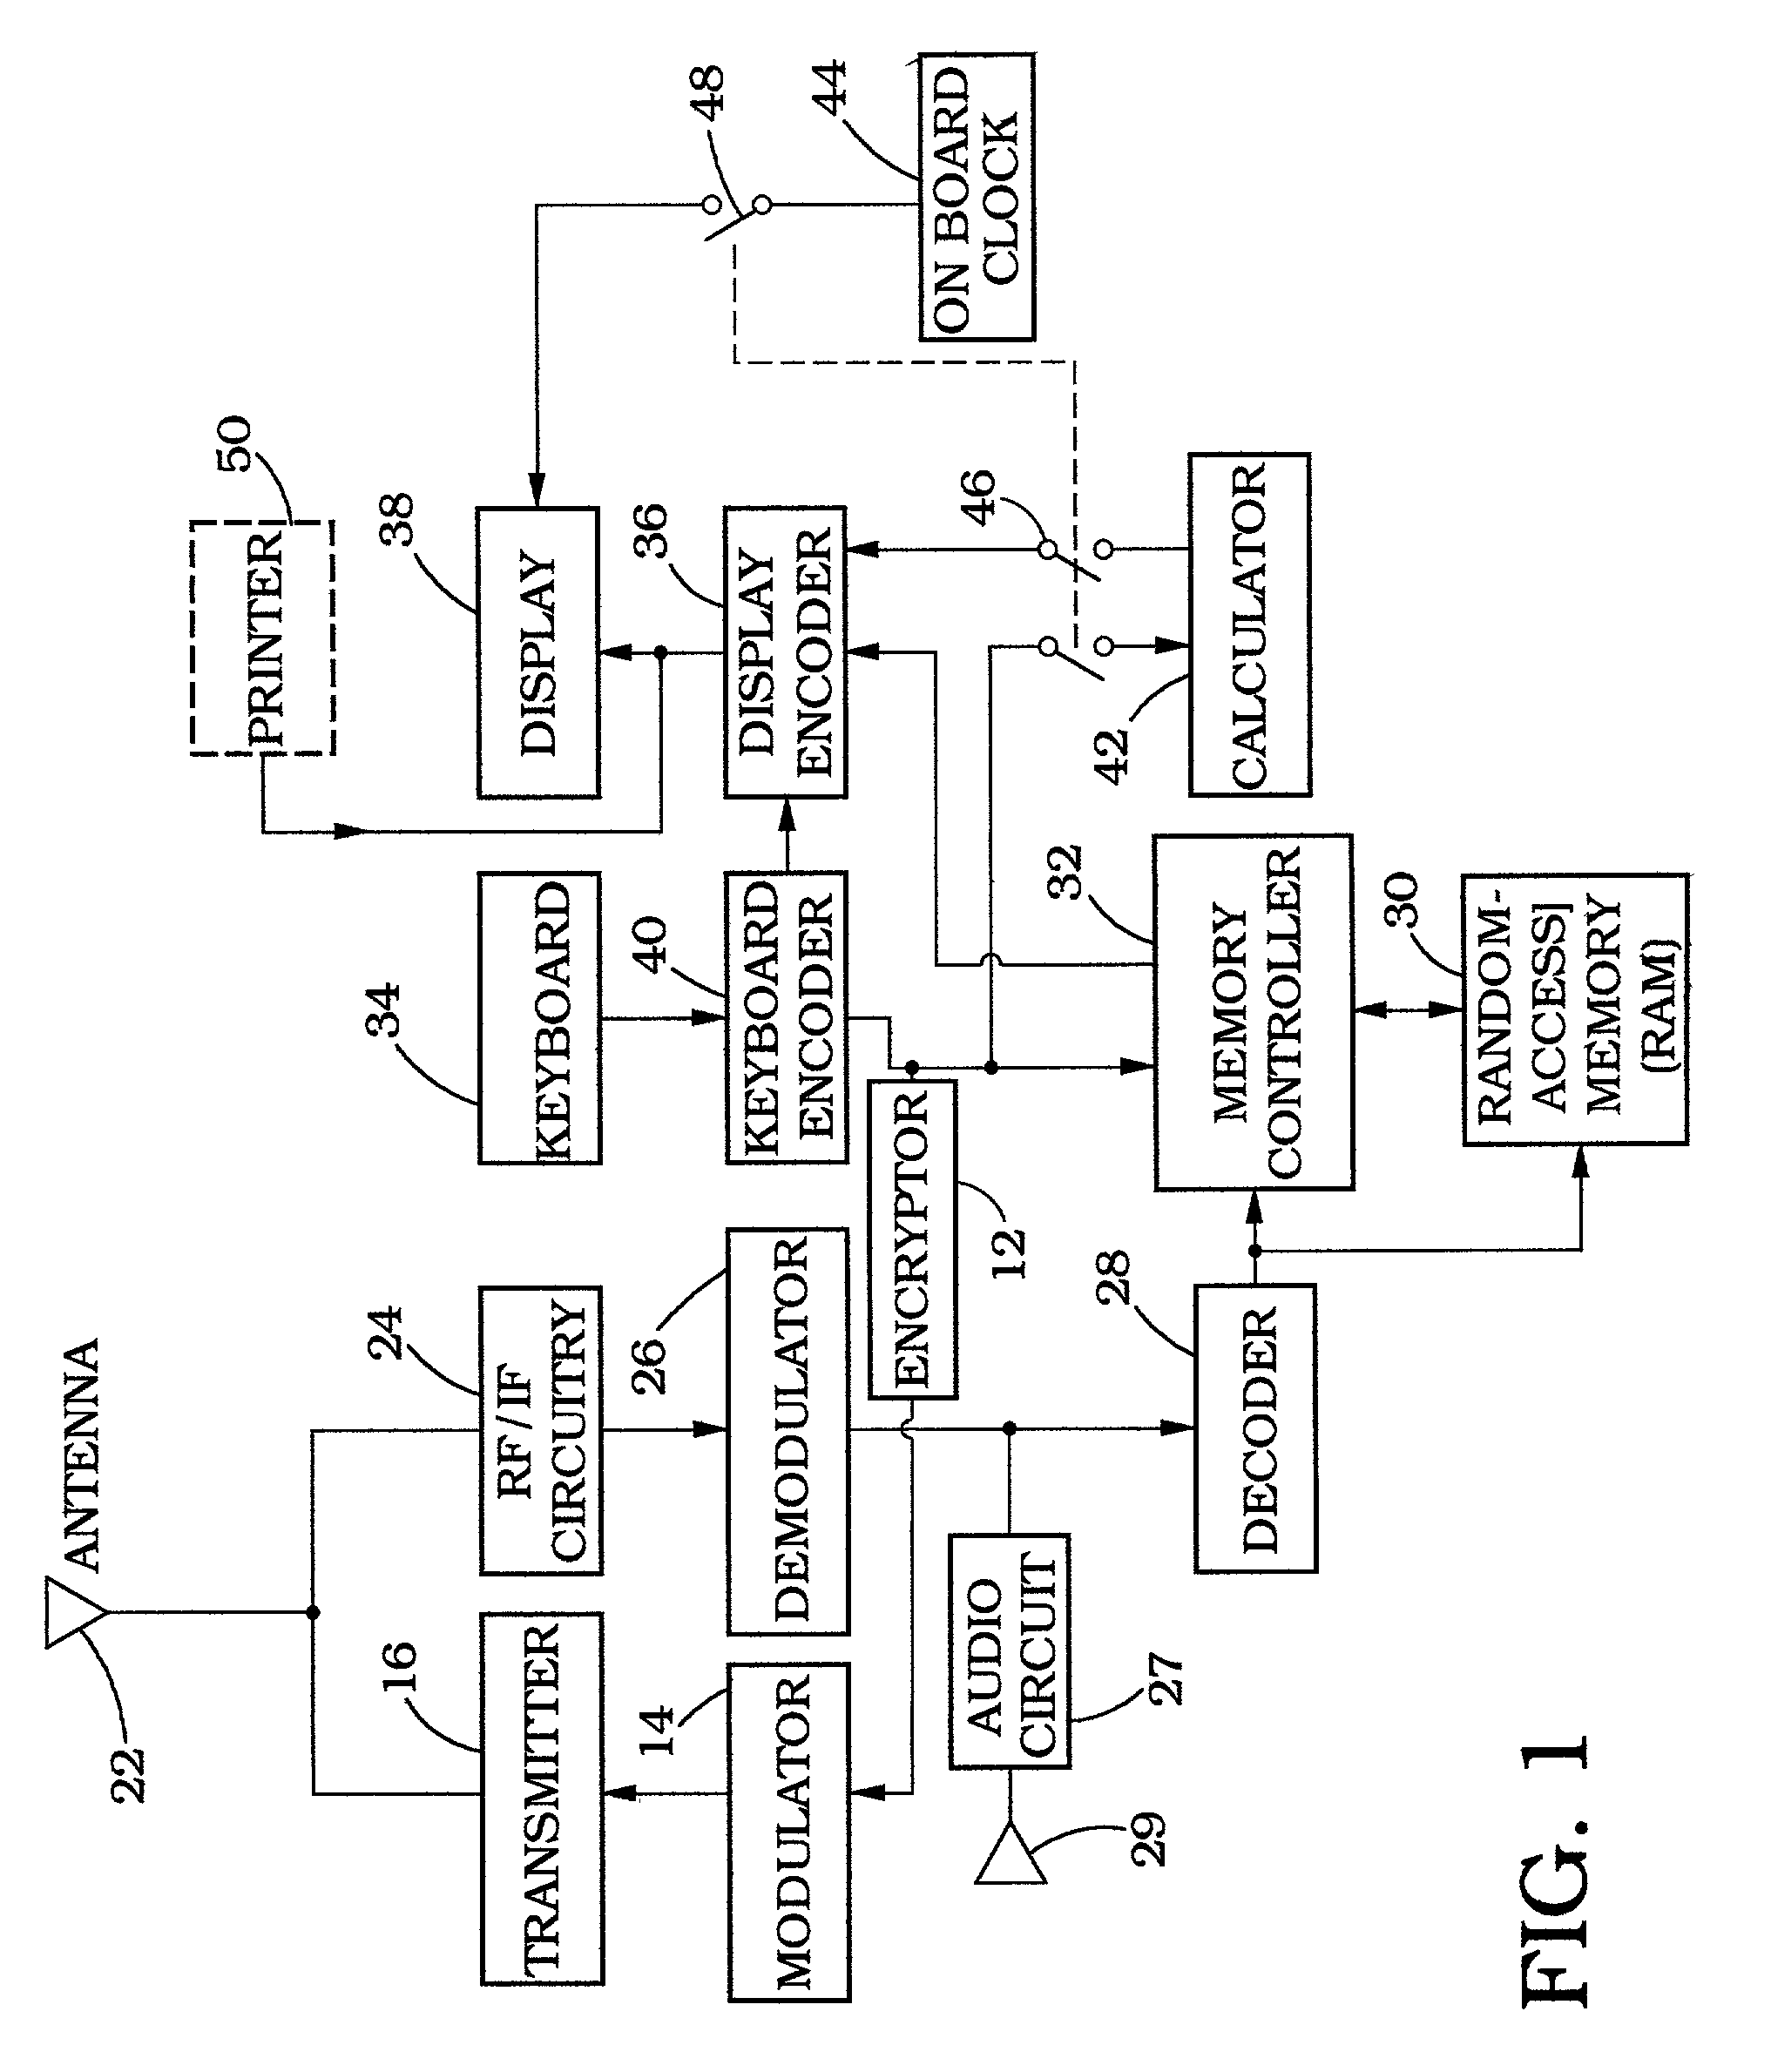 Remote securities based data reception and order system